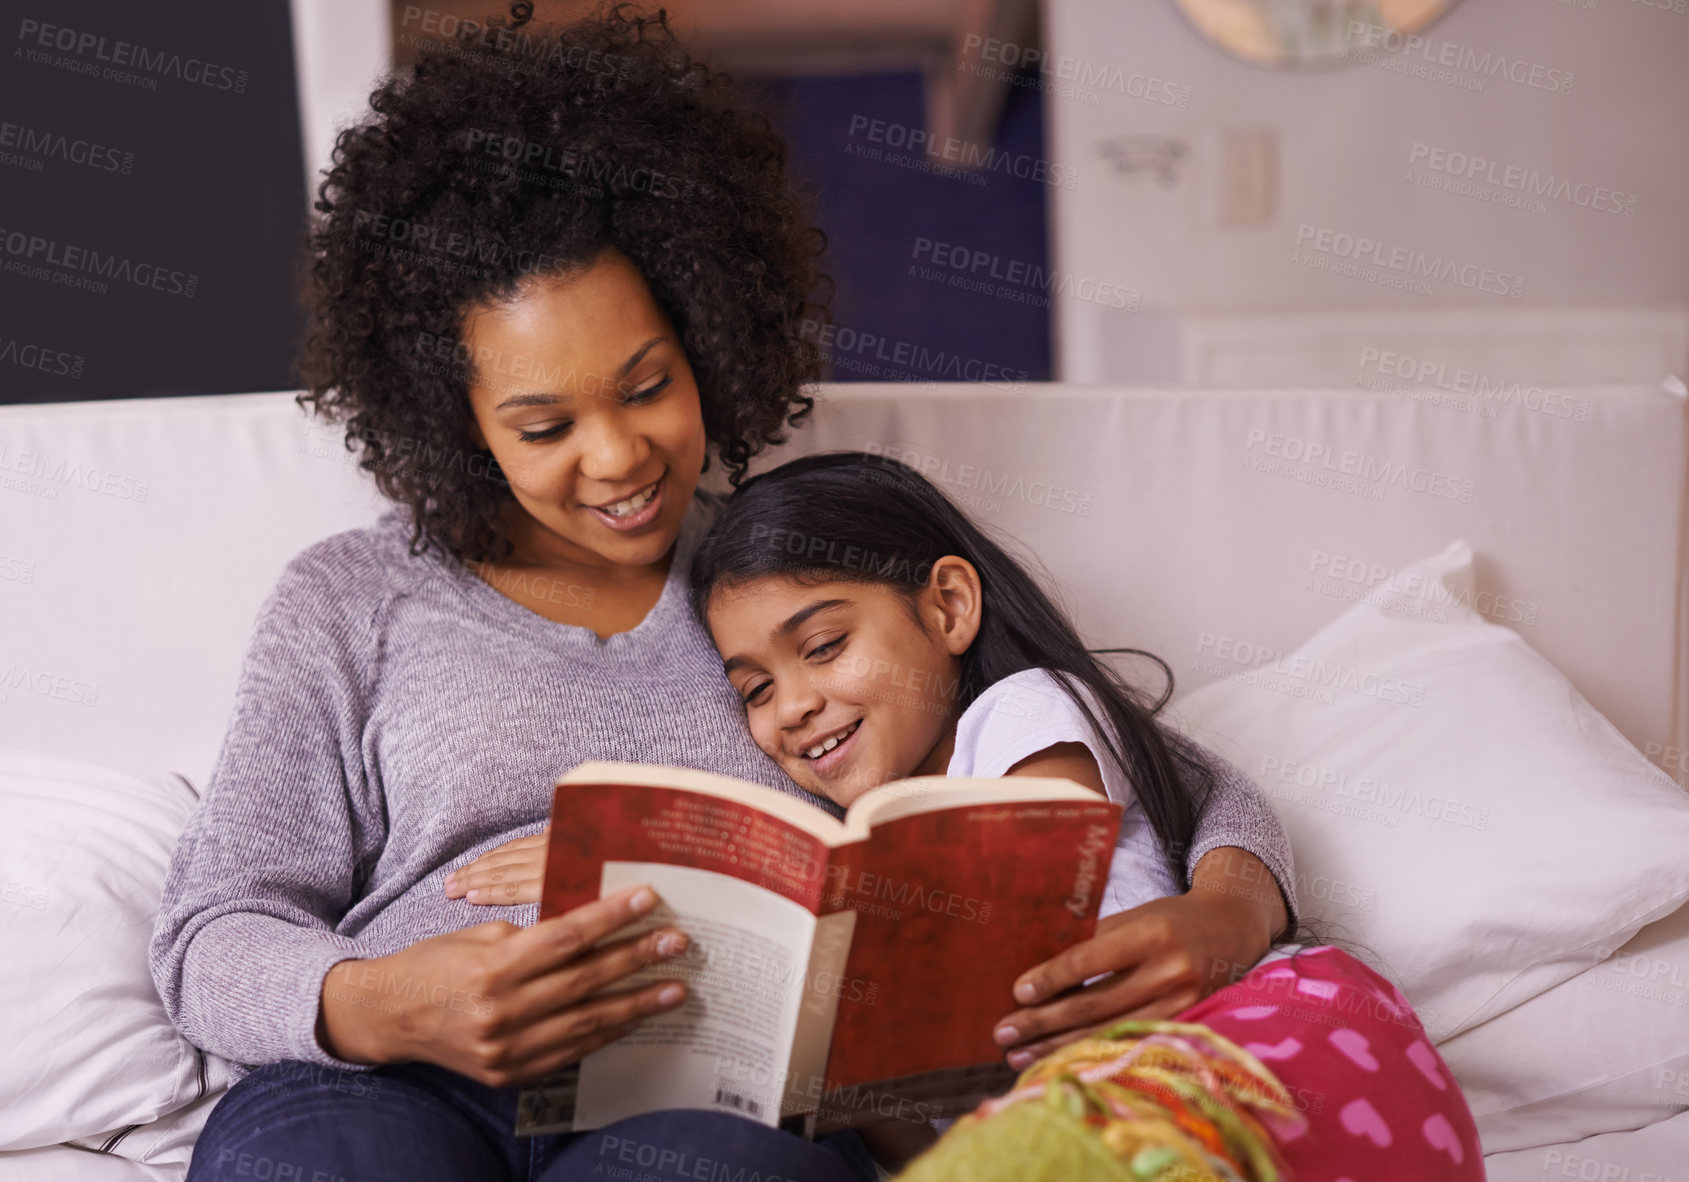 Buy stock photo Cropped shot of a young mother reading to her daughter at home